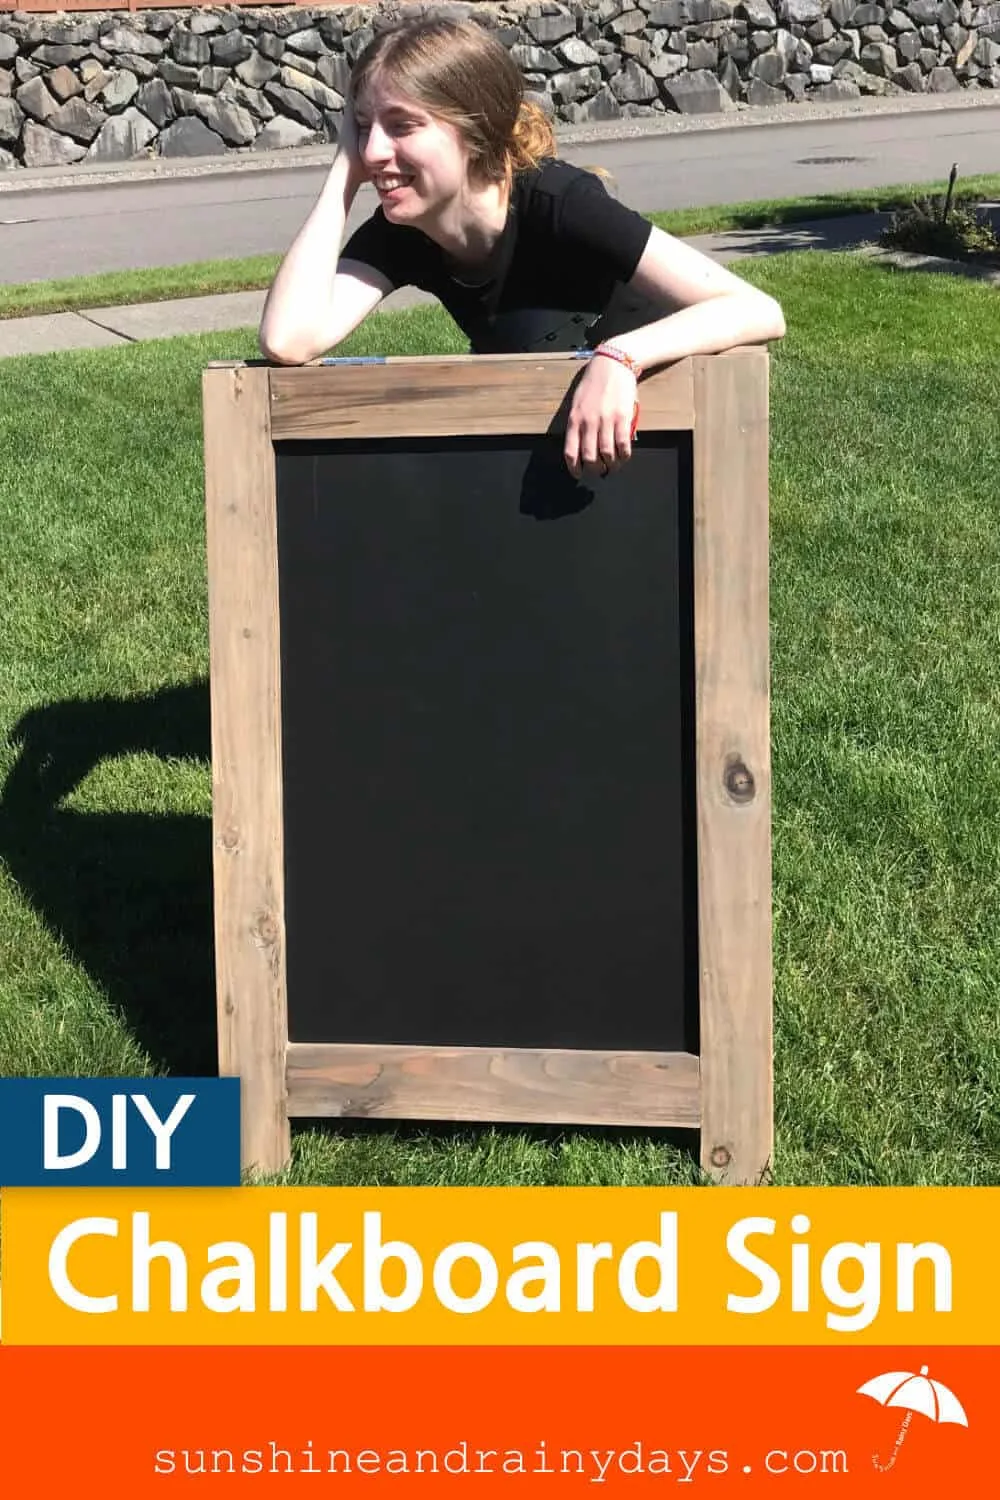 Build a chalkboard sign!